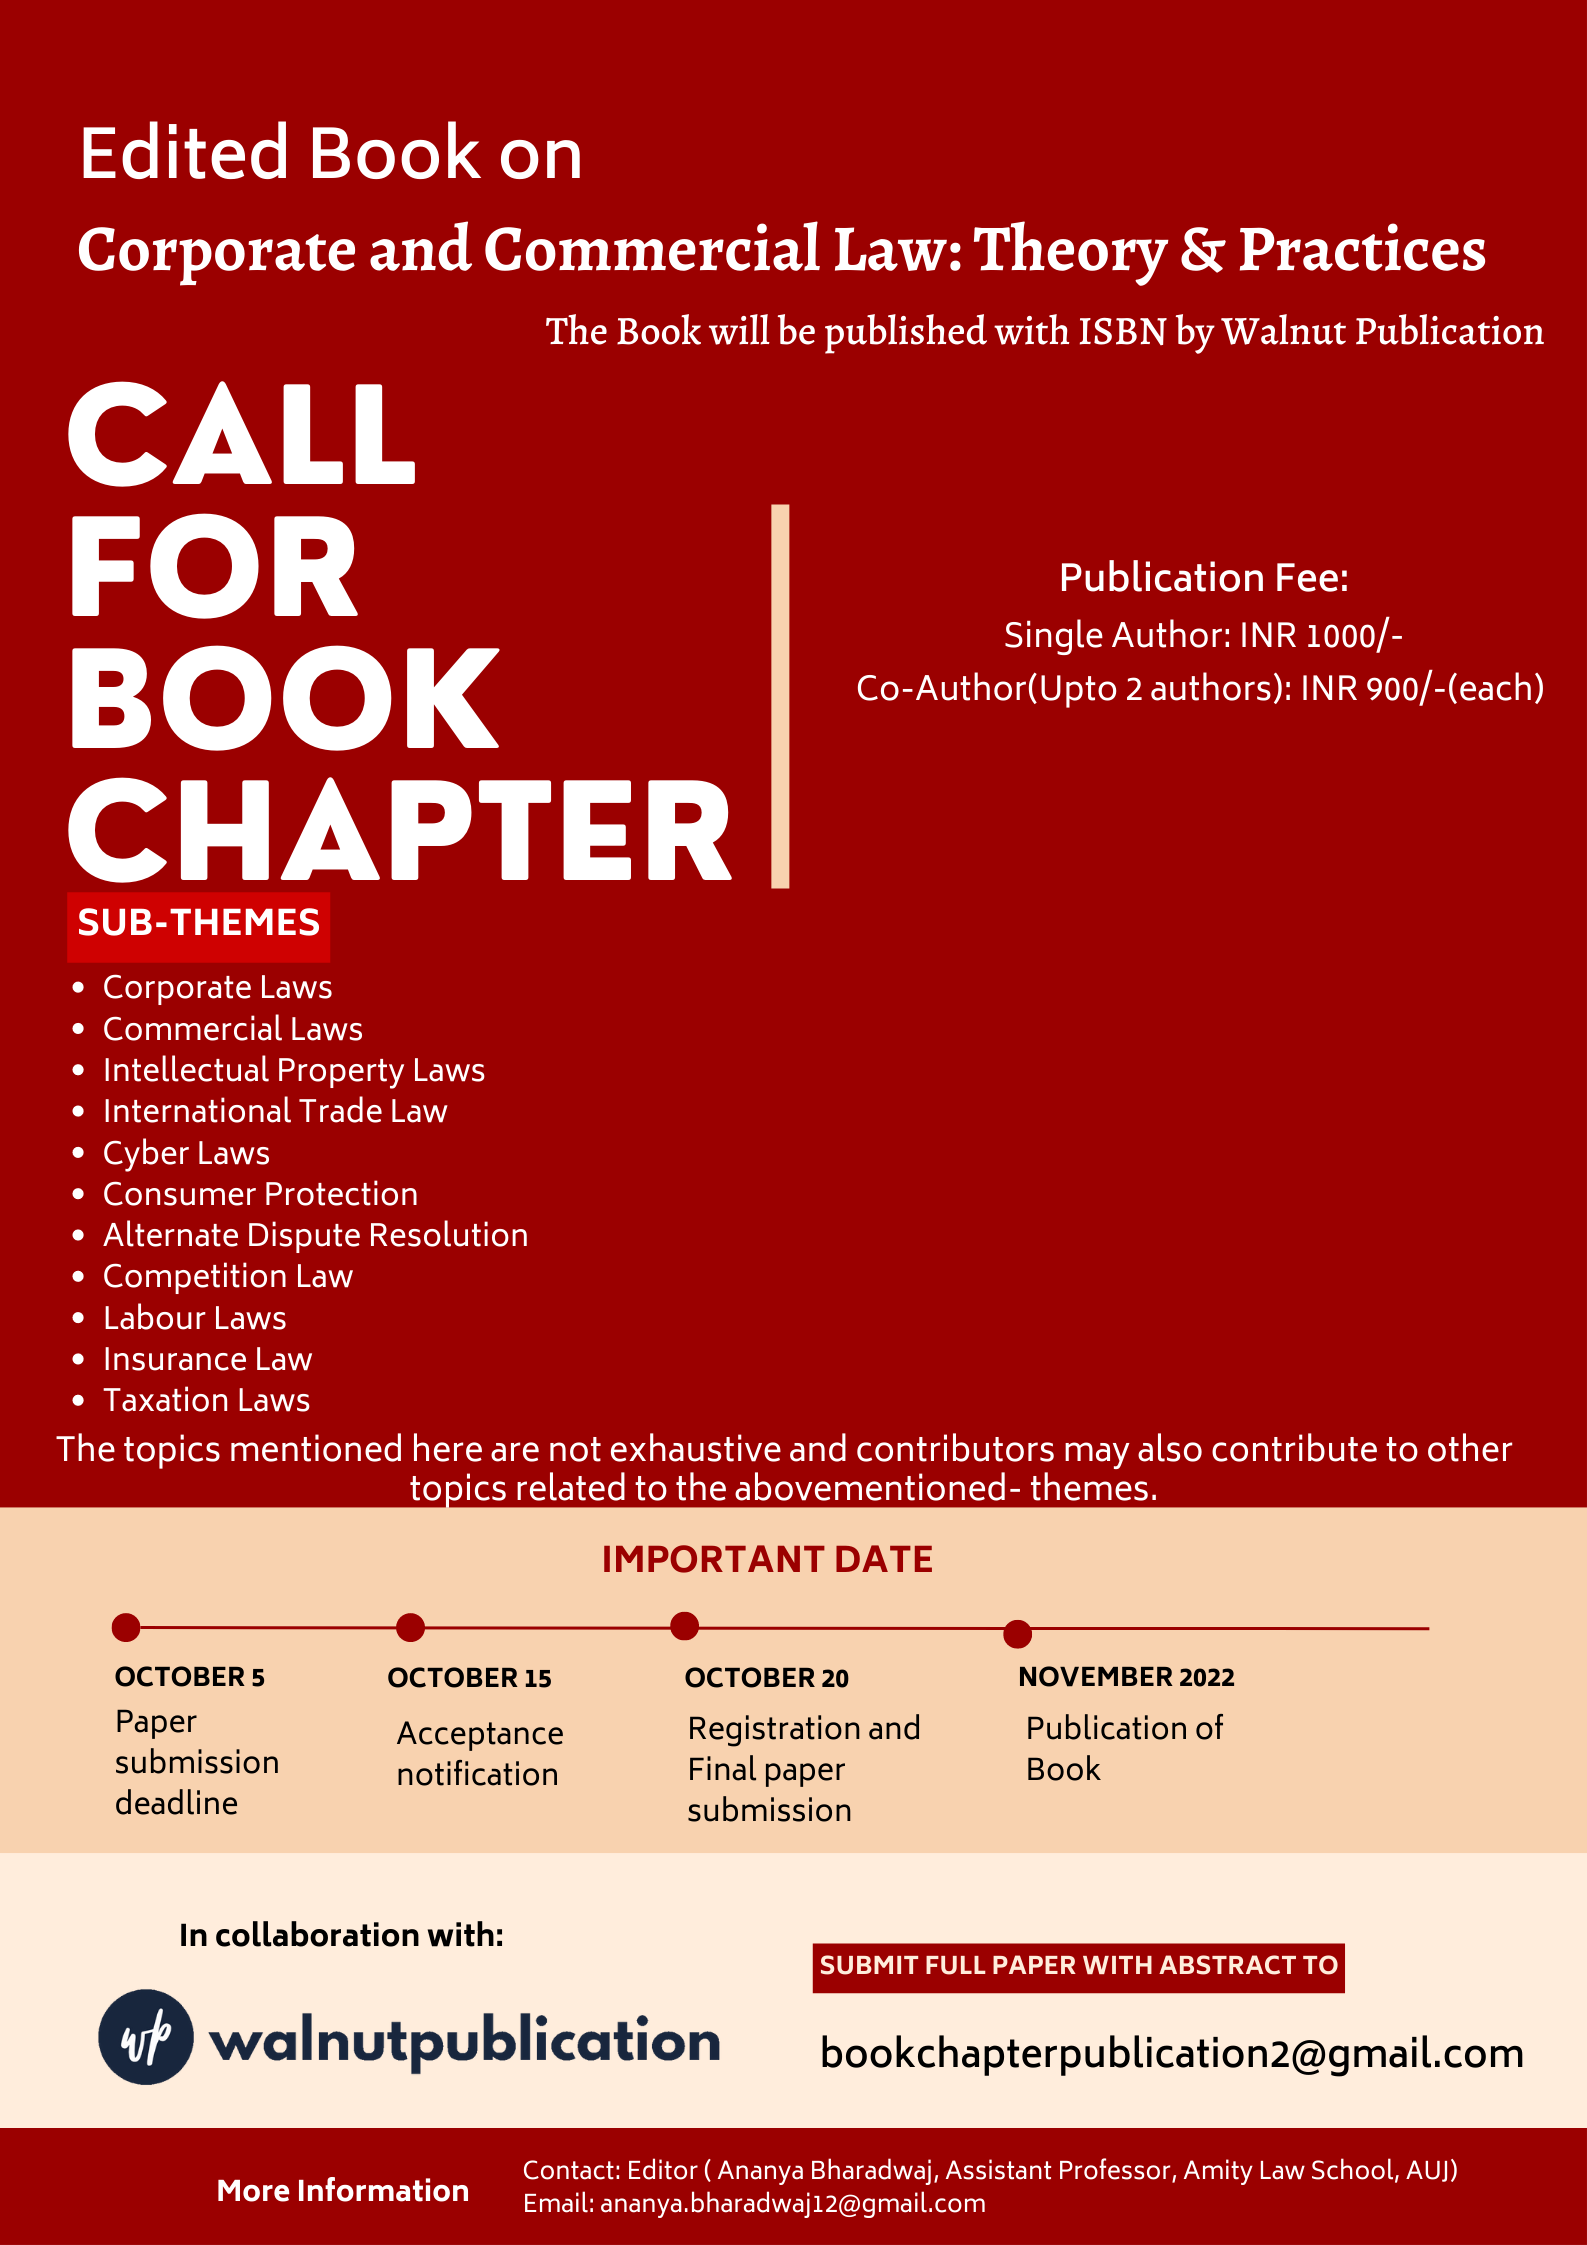 Call for chapter for an edited book on “Corporate and commercial Law